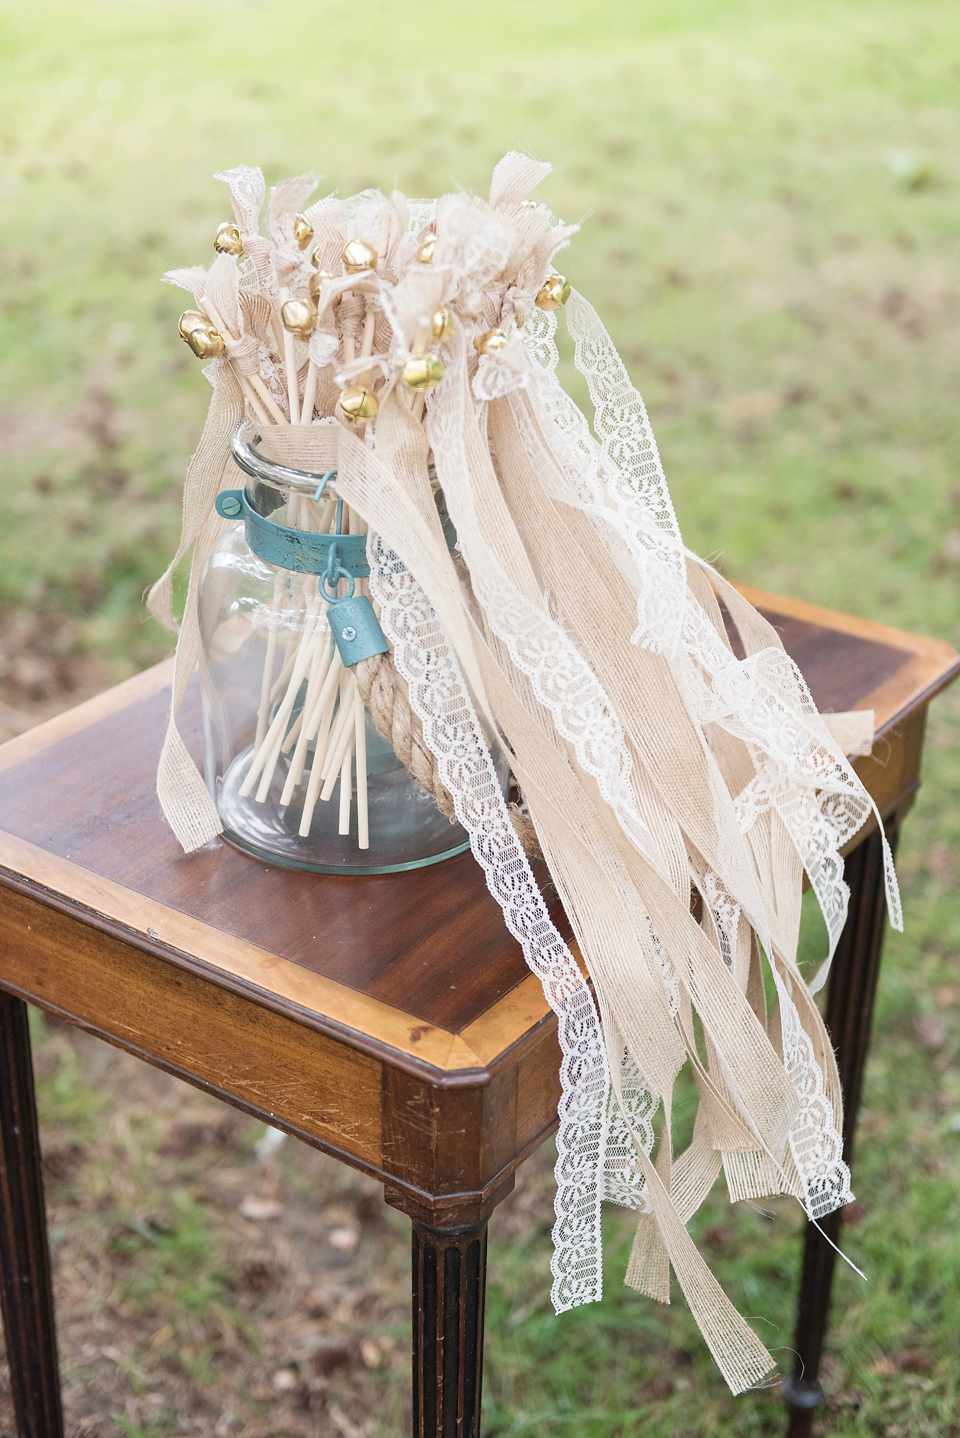 An Essense of Australia dress for a homespun, outdoor, country wedding in pretty pastel shades. Photography by Julie Tinton.